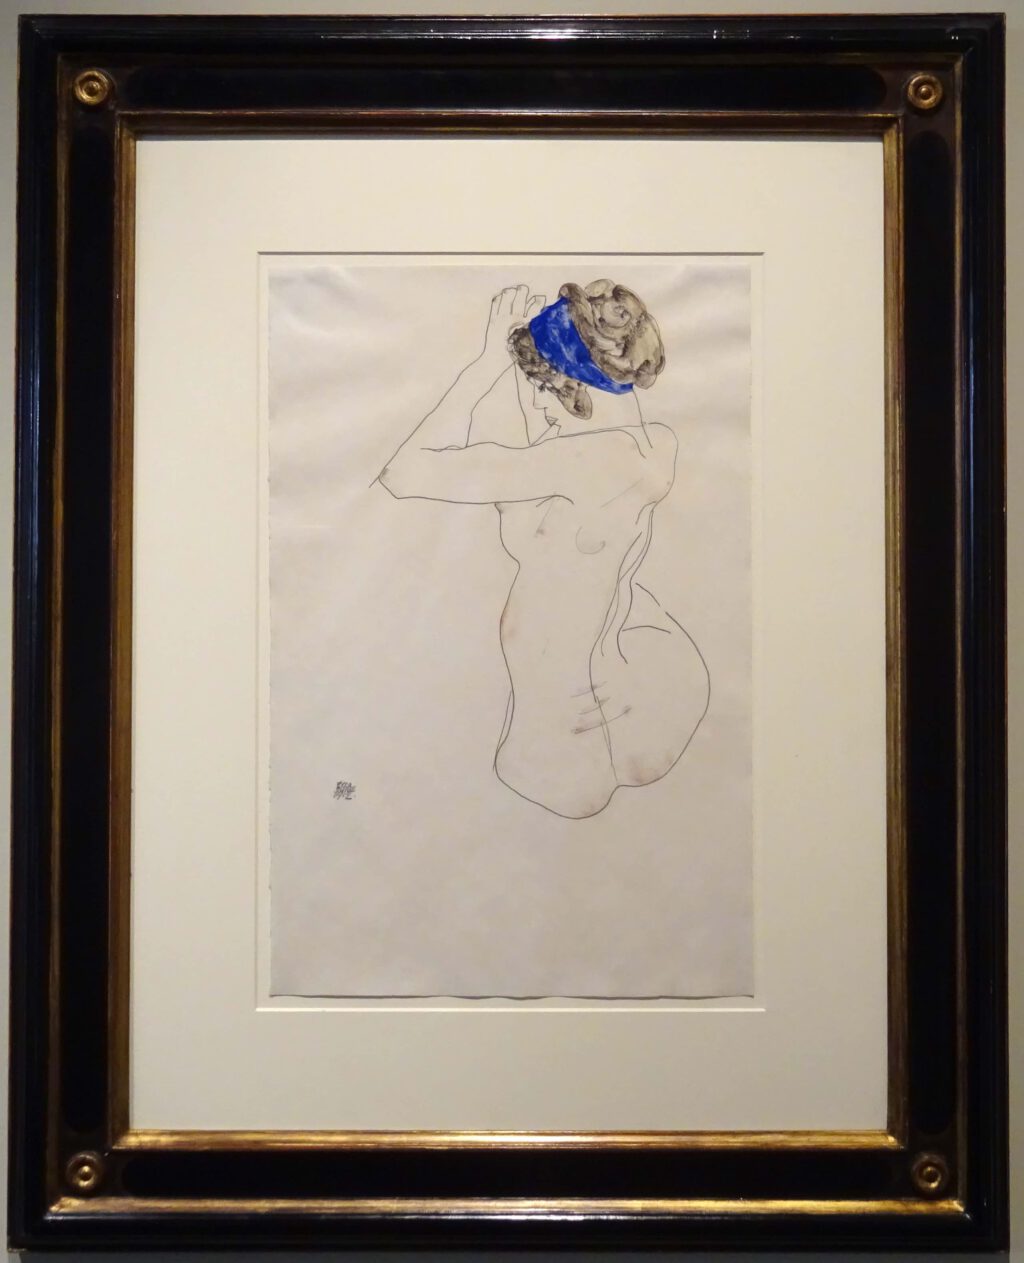 Egon Schiele Seated Female Nude with Blue Headband 1912 Watercolour and pencil on paper